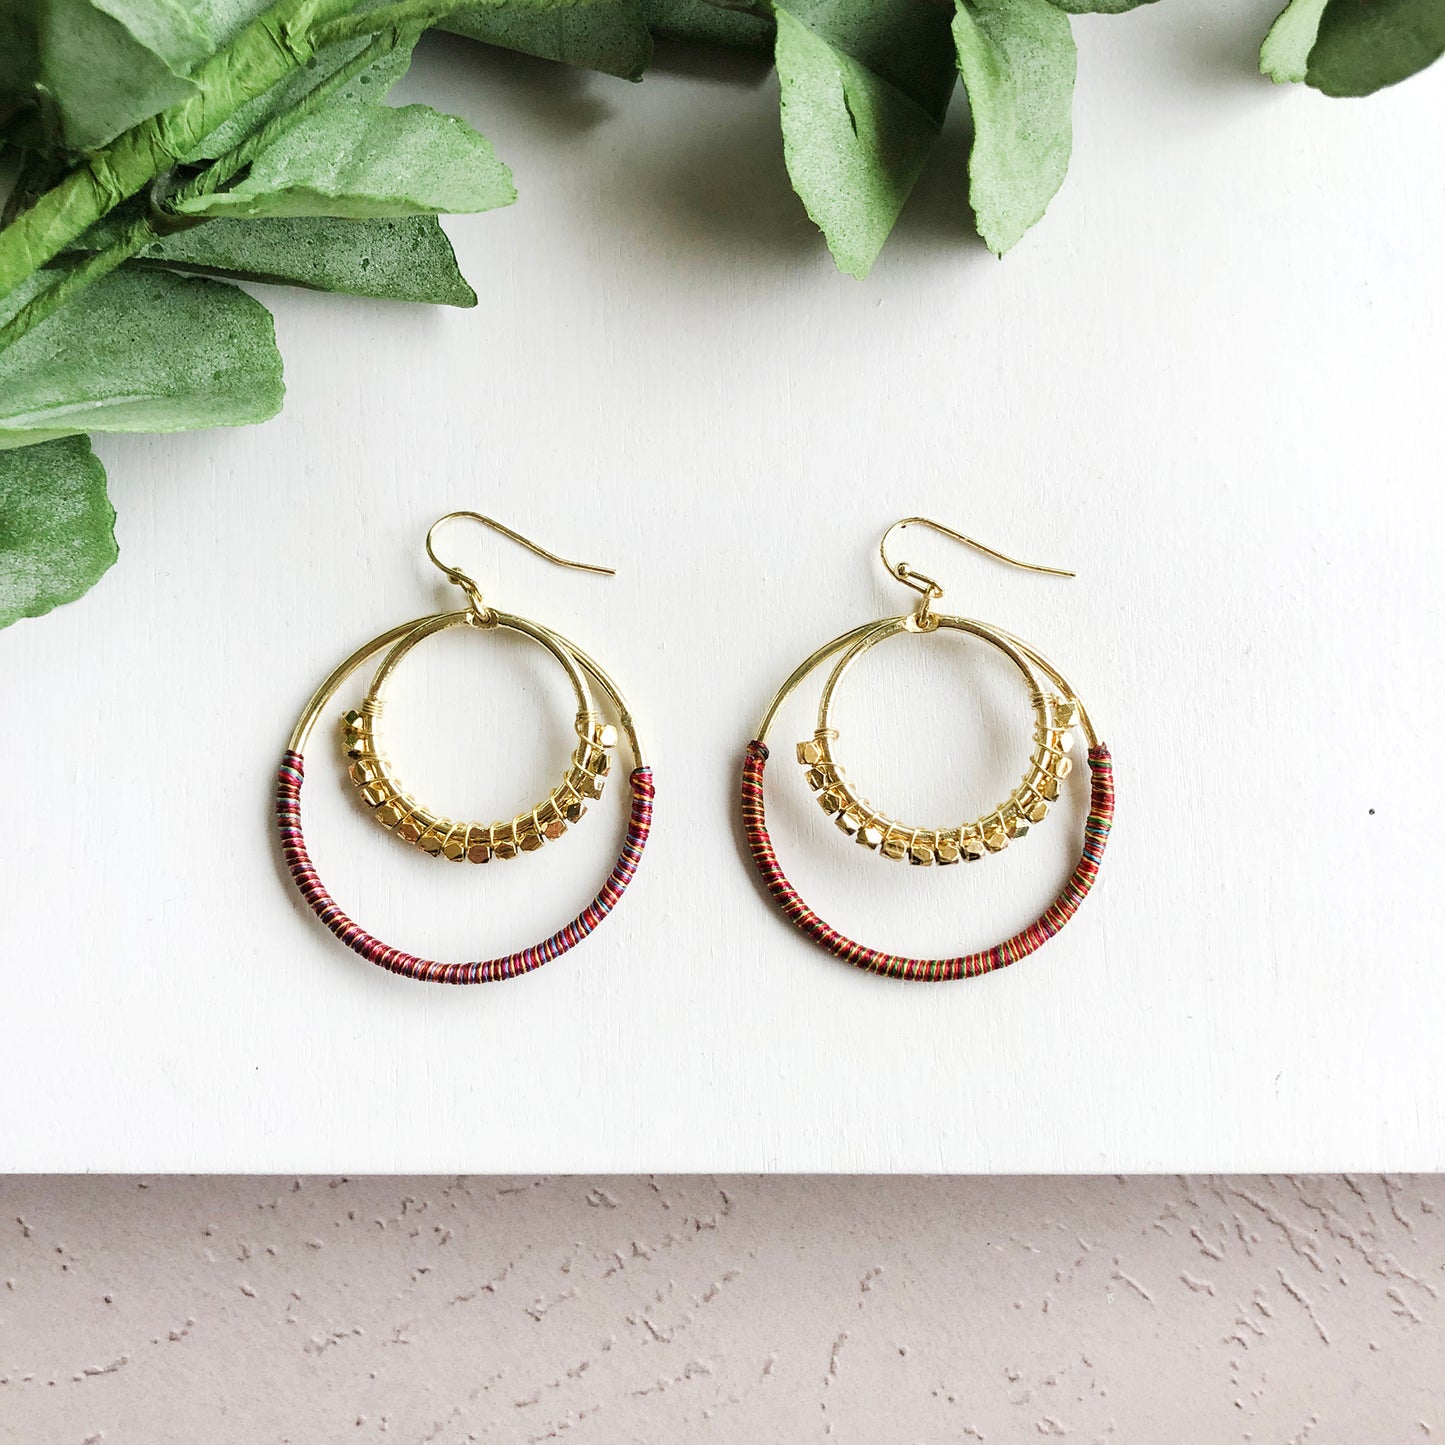 Load image into Gallery viewer, A smaller hoop embellished with faceted metallic beads layers on top of a larger rainbow thread-wrapped hoop to form a pair of earrings.
